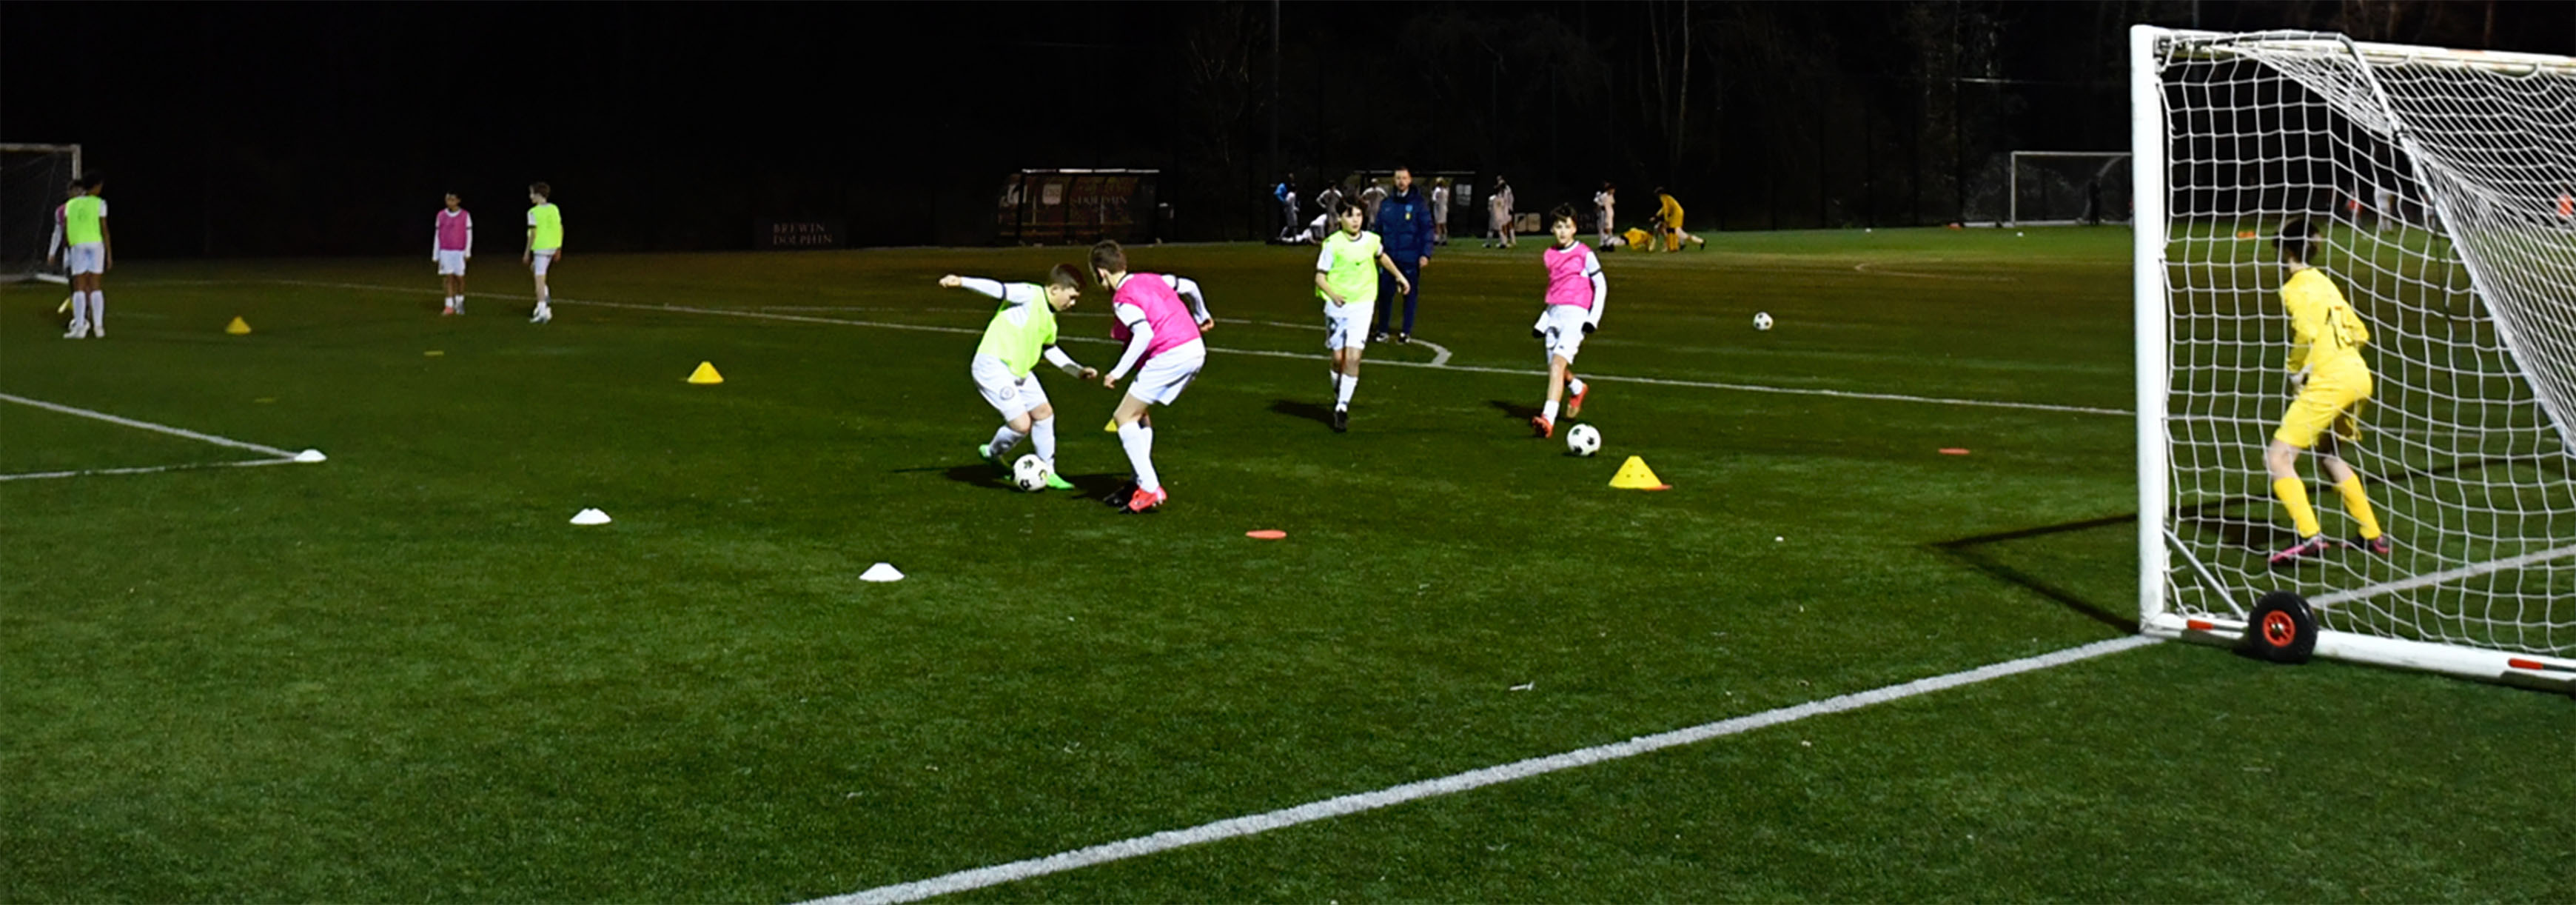 A training session taking place outdoors at night.